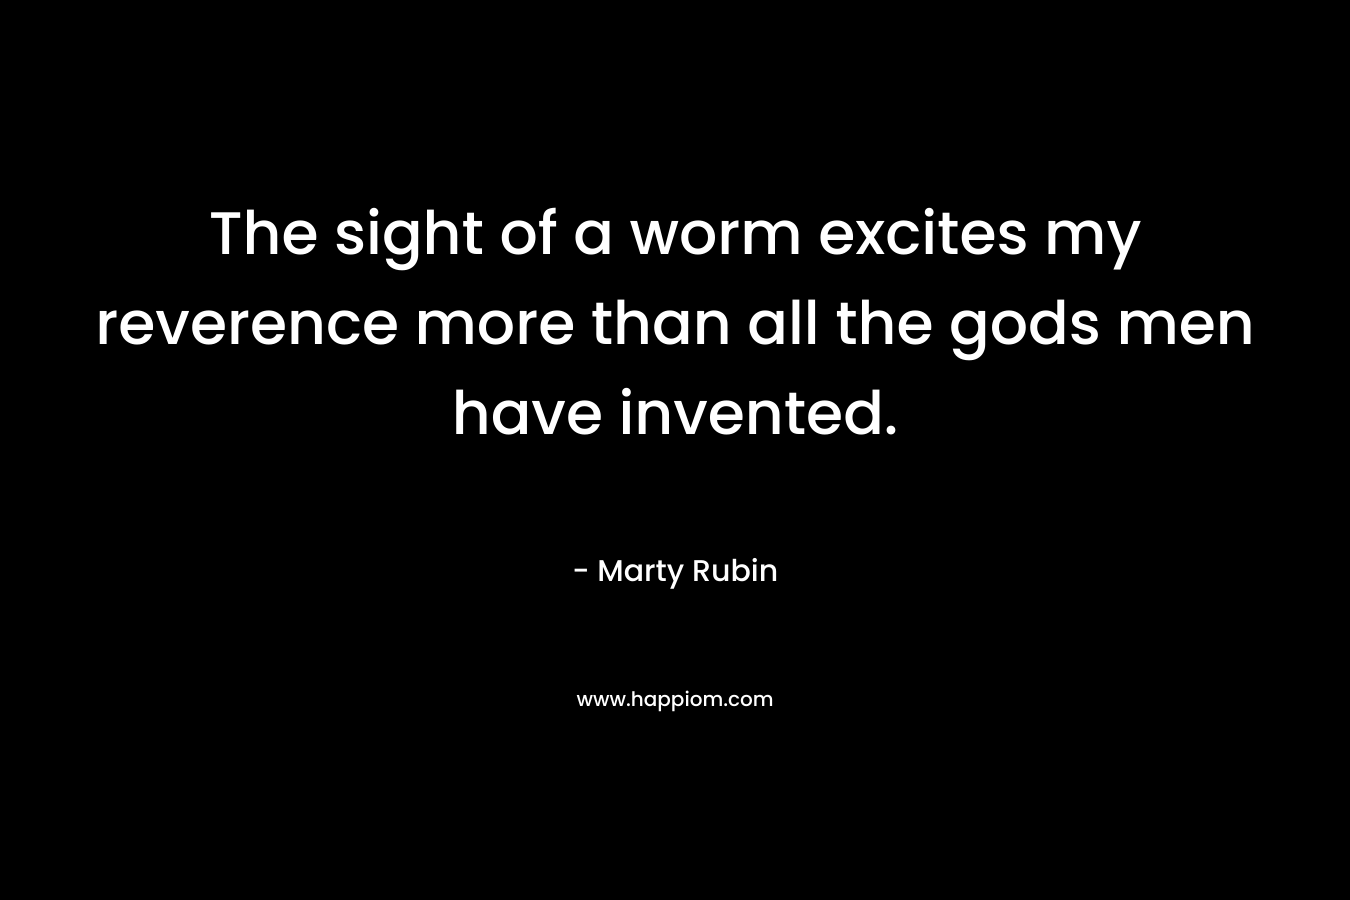 The sight of a worm excites my reverence more than all the gods men have invented. – Marty Rubin